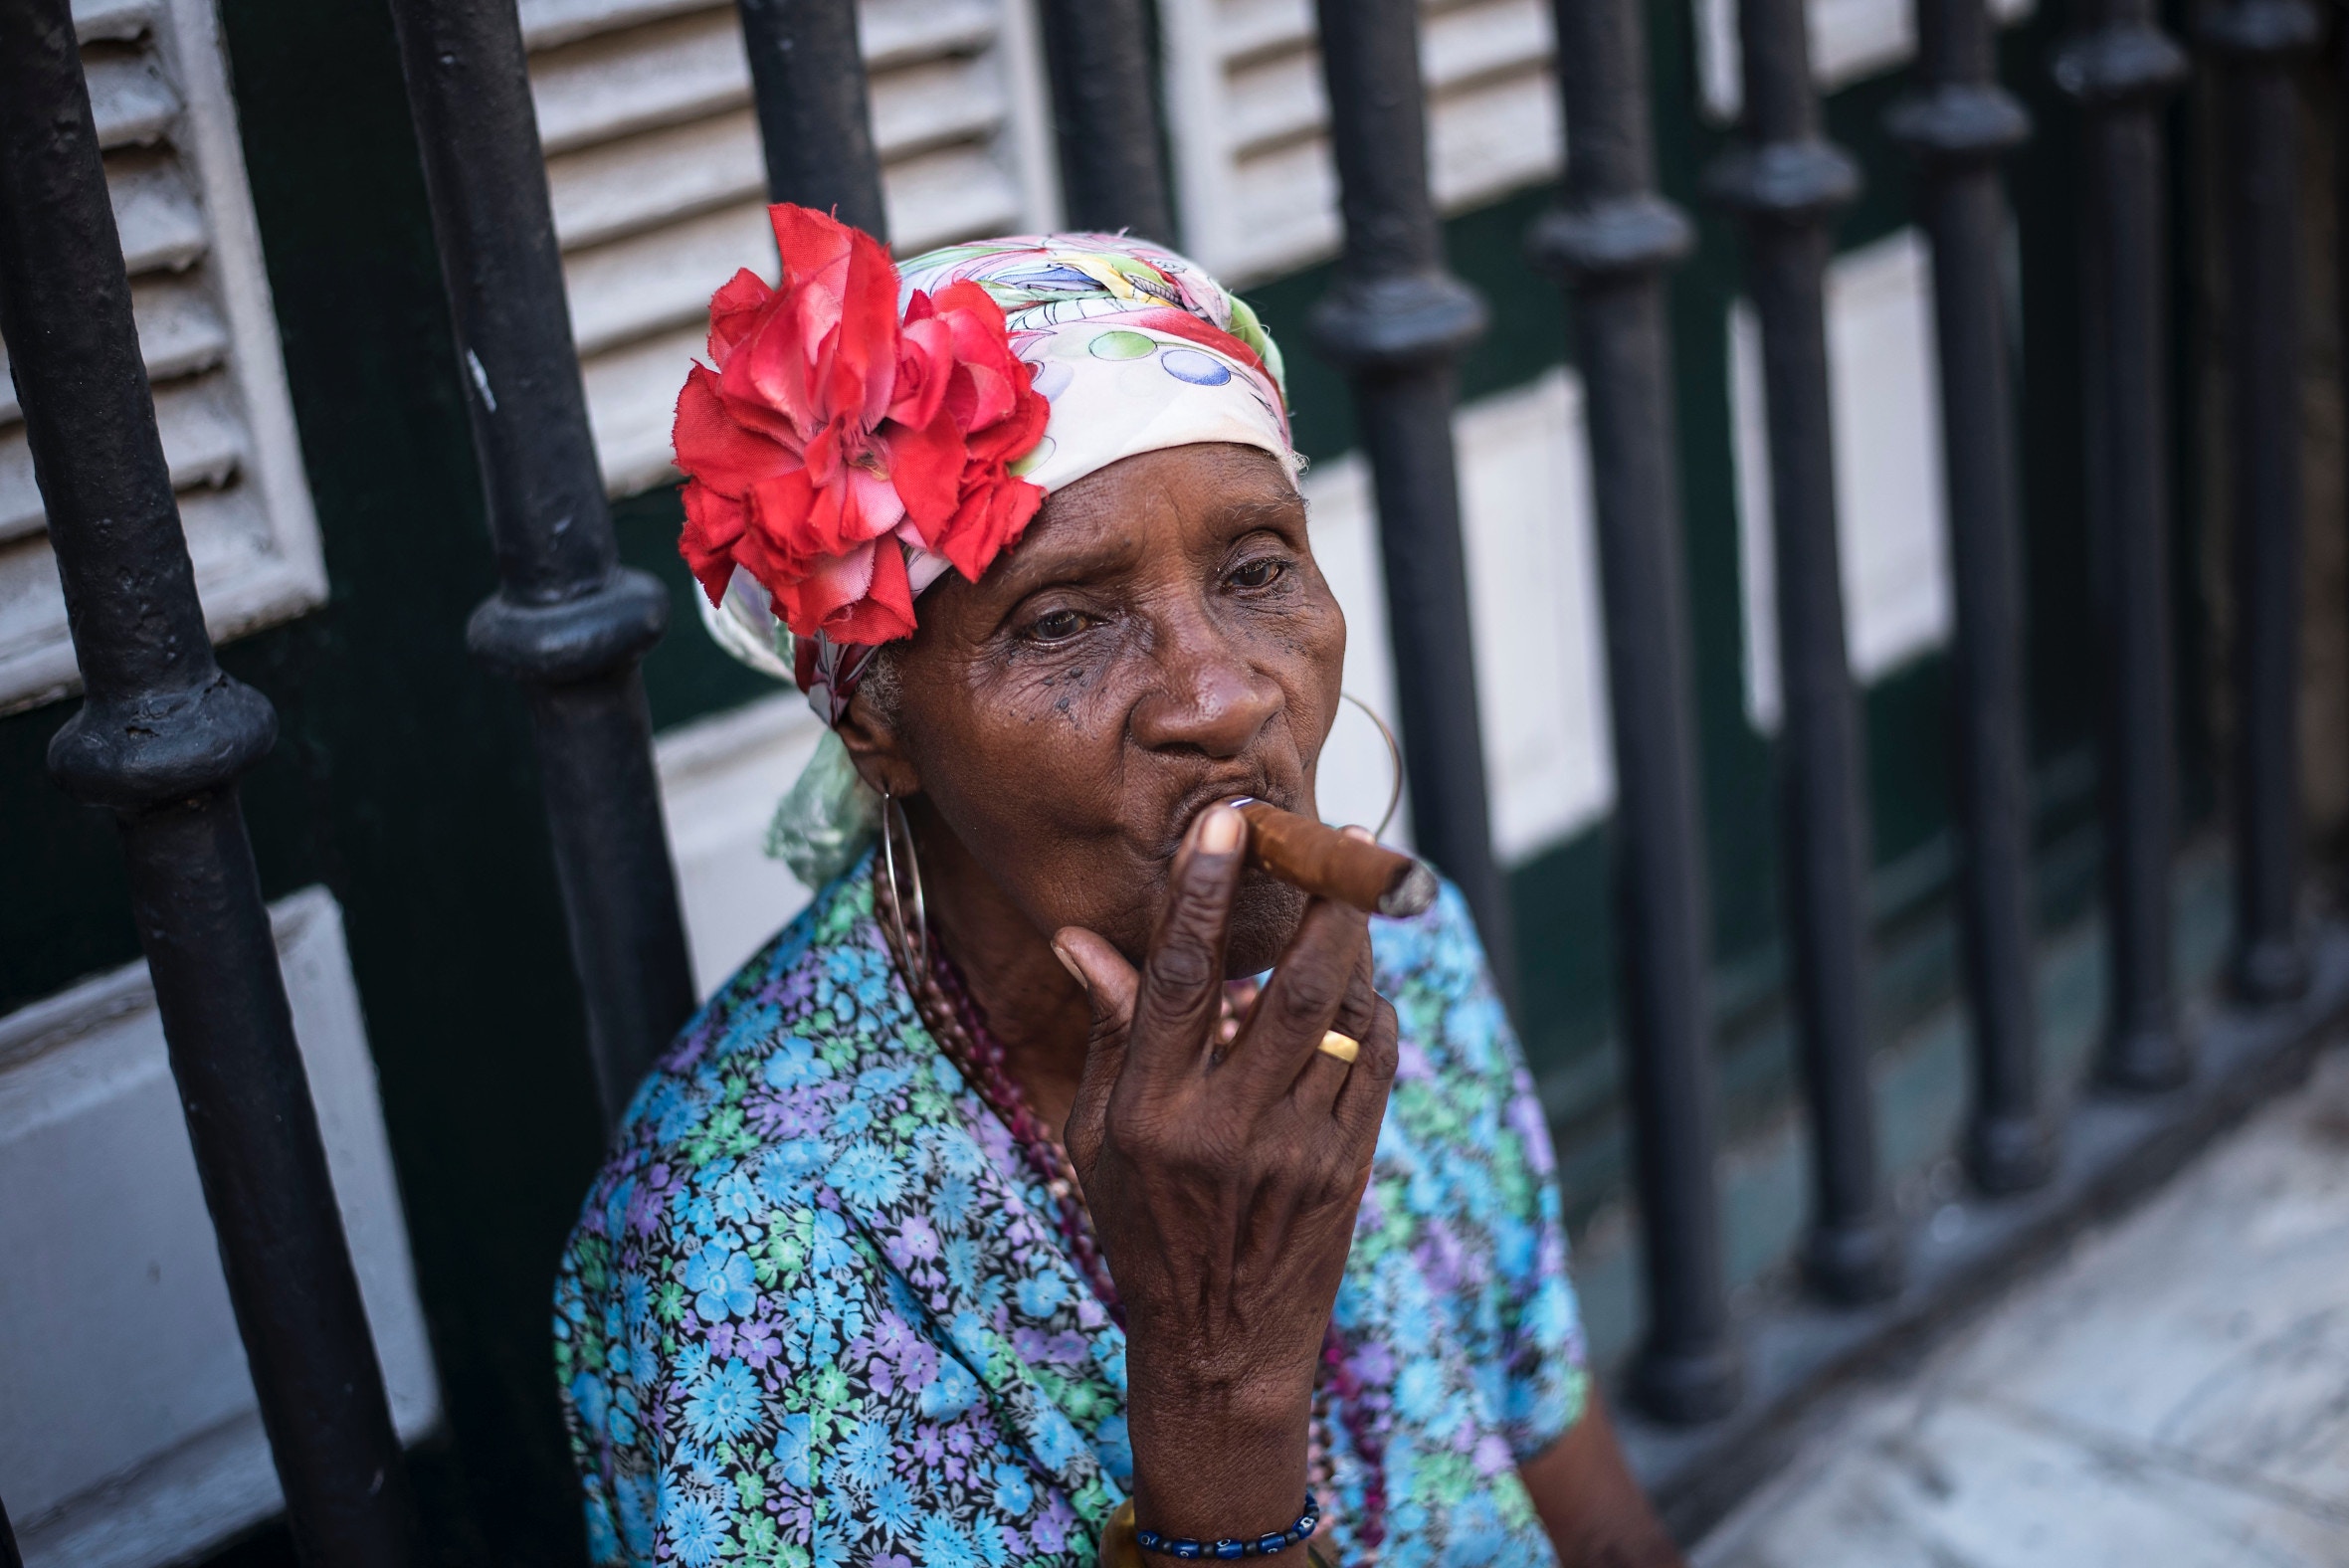 Here's The Real Deal On WiFi In Cuba